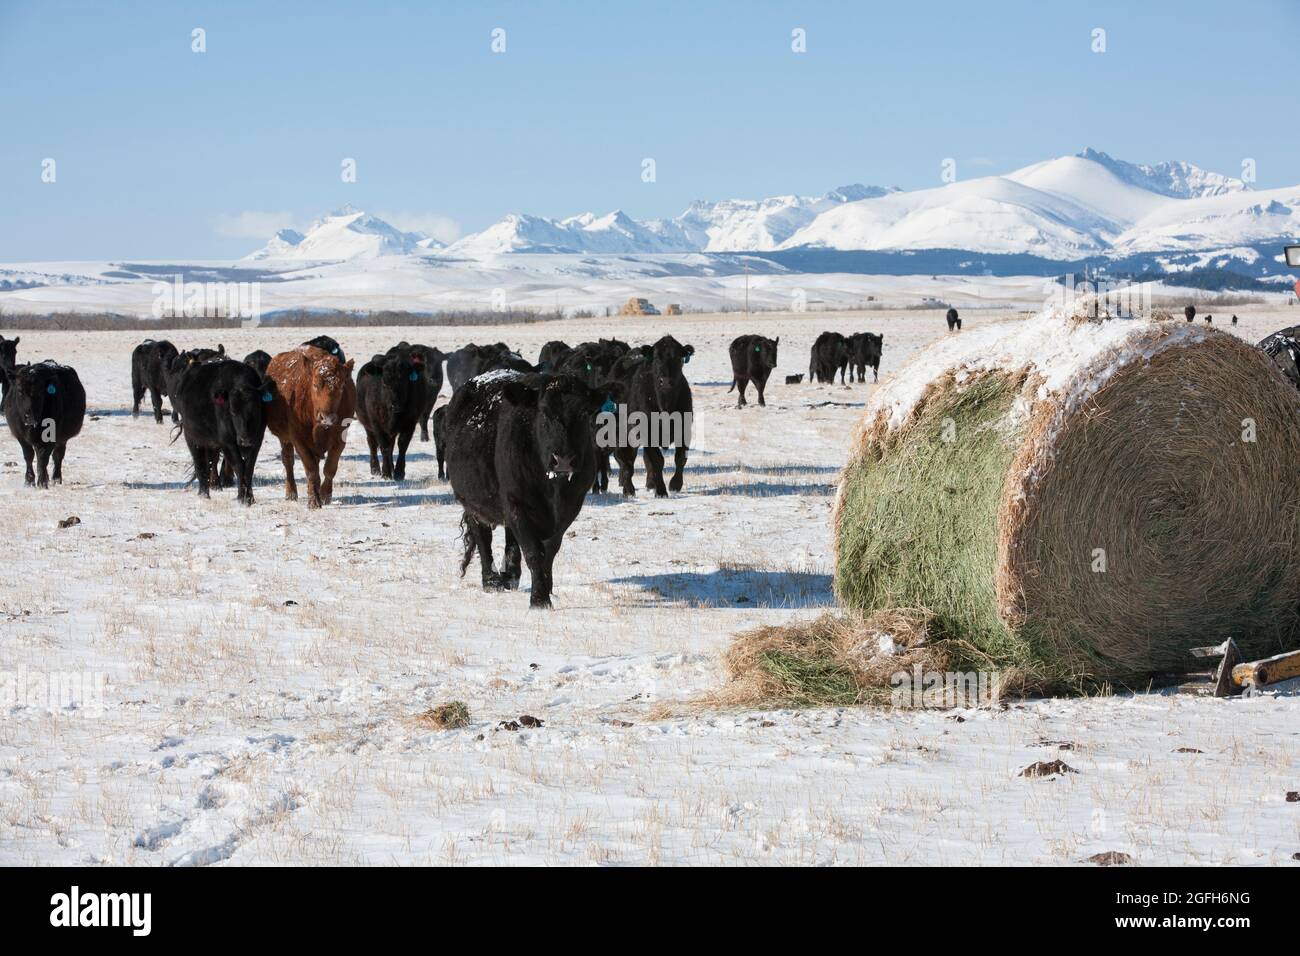 Black Angus cattle stream towards a bale of hay on a snowy day. Rocky Mountains in background. Stock Photo